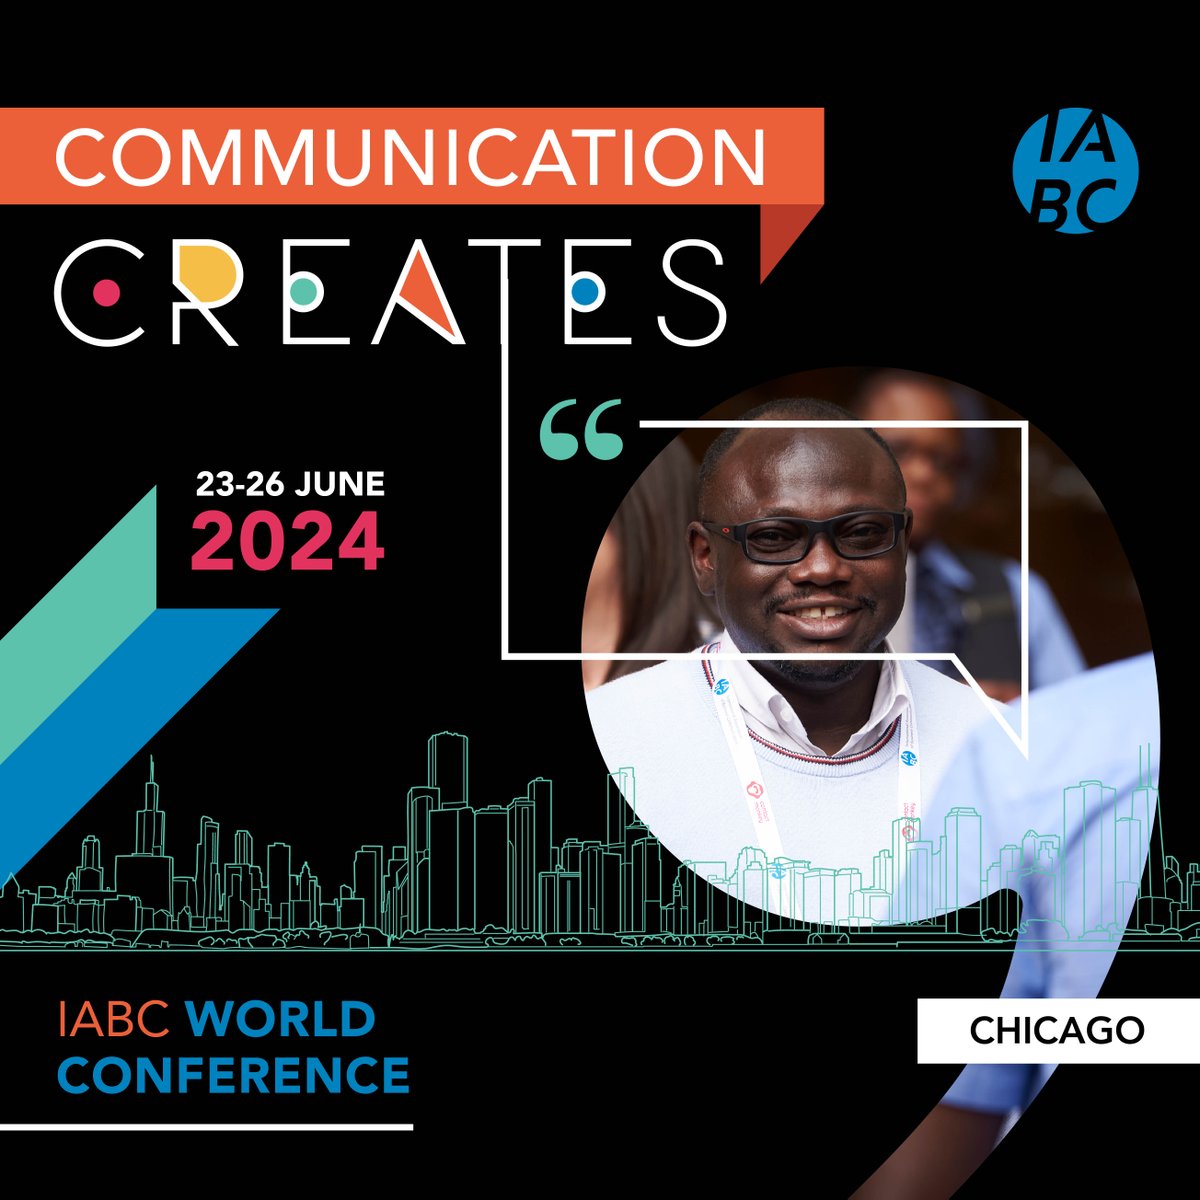 The countdown is on for #IABC24! Where else can you connect over several days with some of the top minds in communication? Skip out on the FOMO – register now to join us this June. hubs.li/Q02w5Rv70

#WorldConference #GlobalNetwork